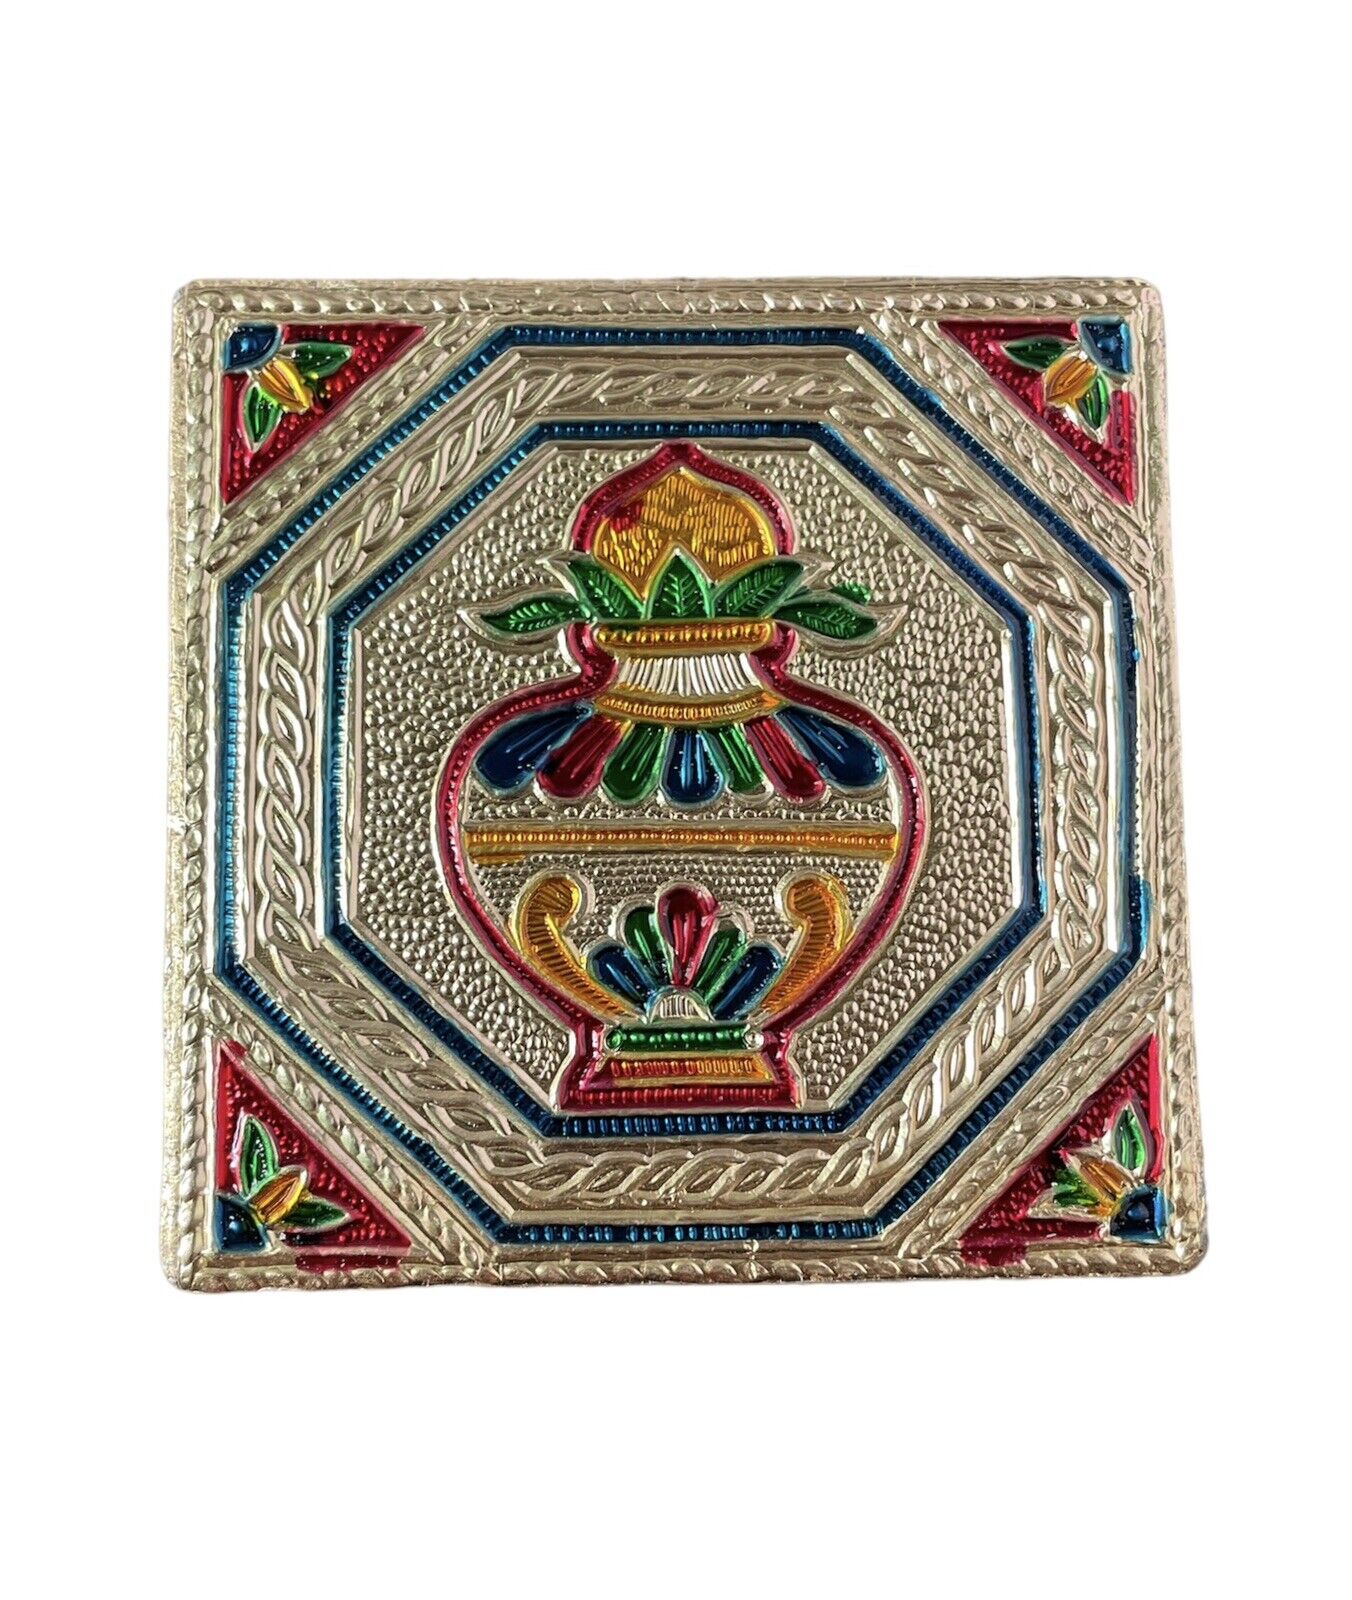 4” x 4” Indian Bajot Bajoth Pooja Puja Chowki Hindu Low Table For Staute Temple